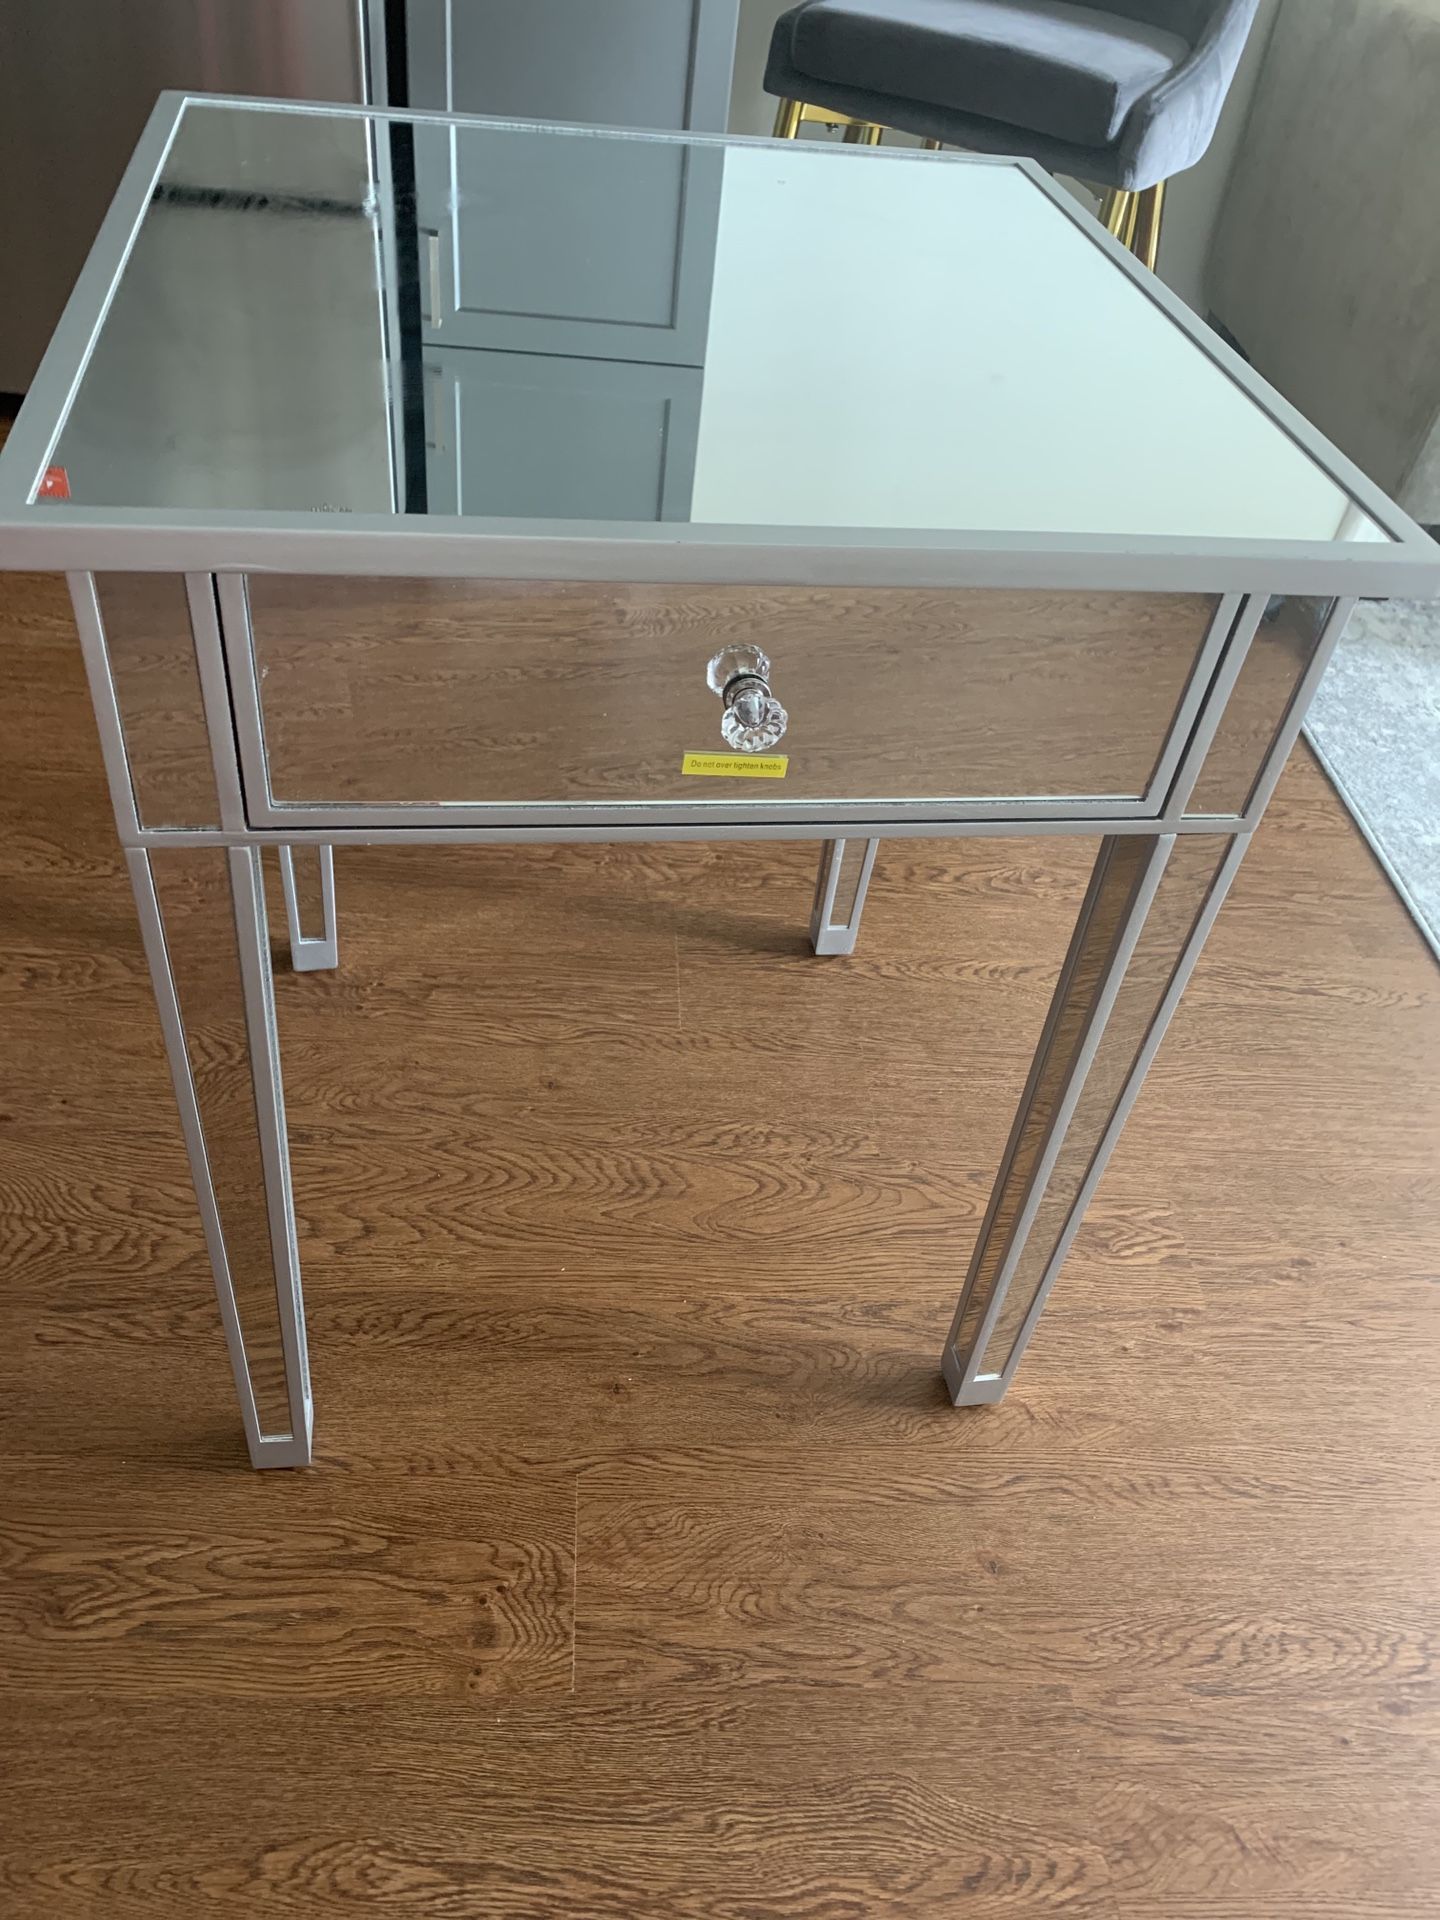 PERFECT ALL GLASS/MIRROR NIGHT STAND (LIKE NEW)